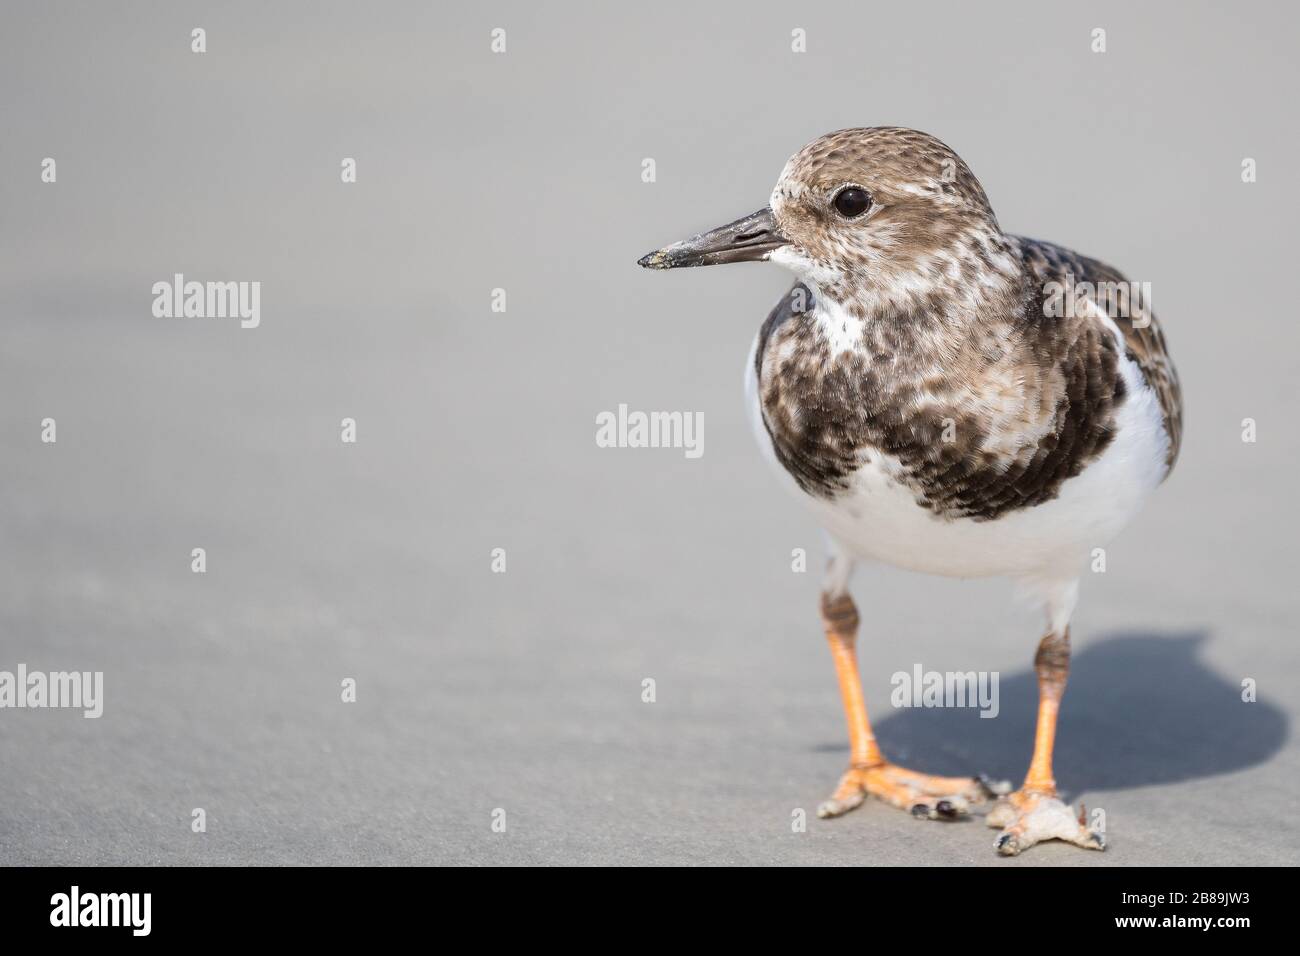 A Rudy Turnstone Searching the Beach for Food Stock Photo